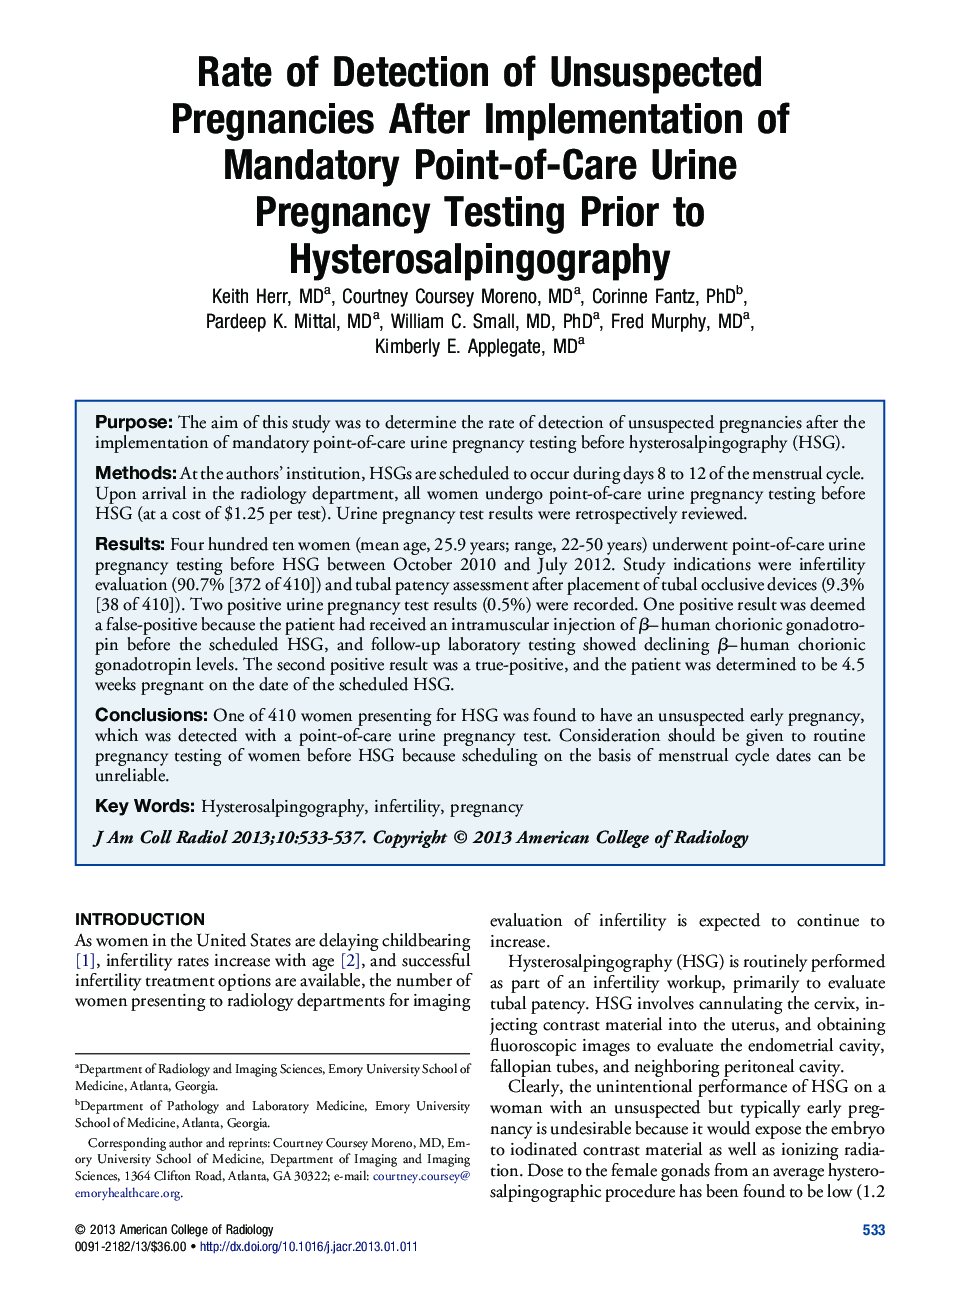 Rate of Detection of Unsuspected Pregnancies After Implementation of Mandatory Point-of-Care Urine Pregnancy Testing Prior to Hysterosalpingography